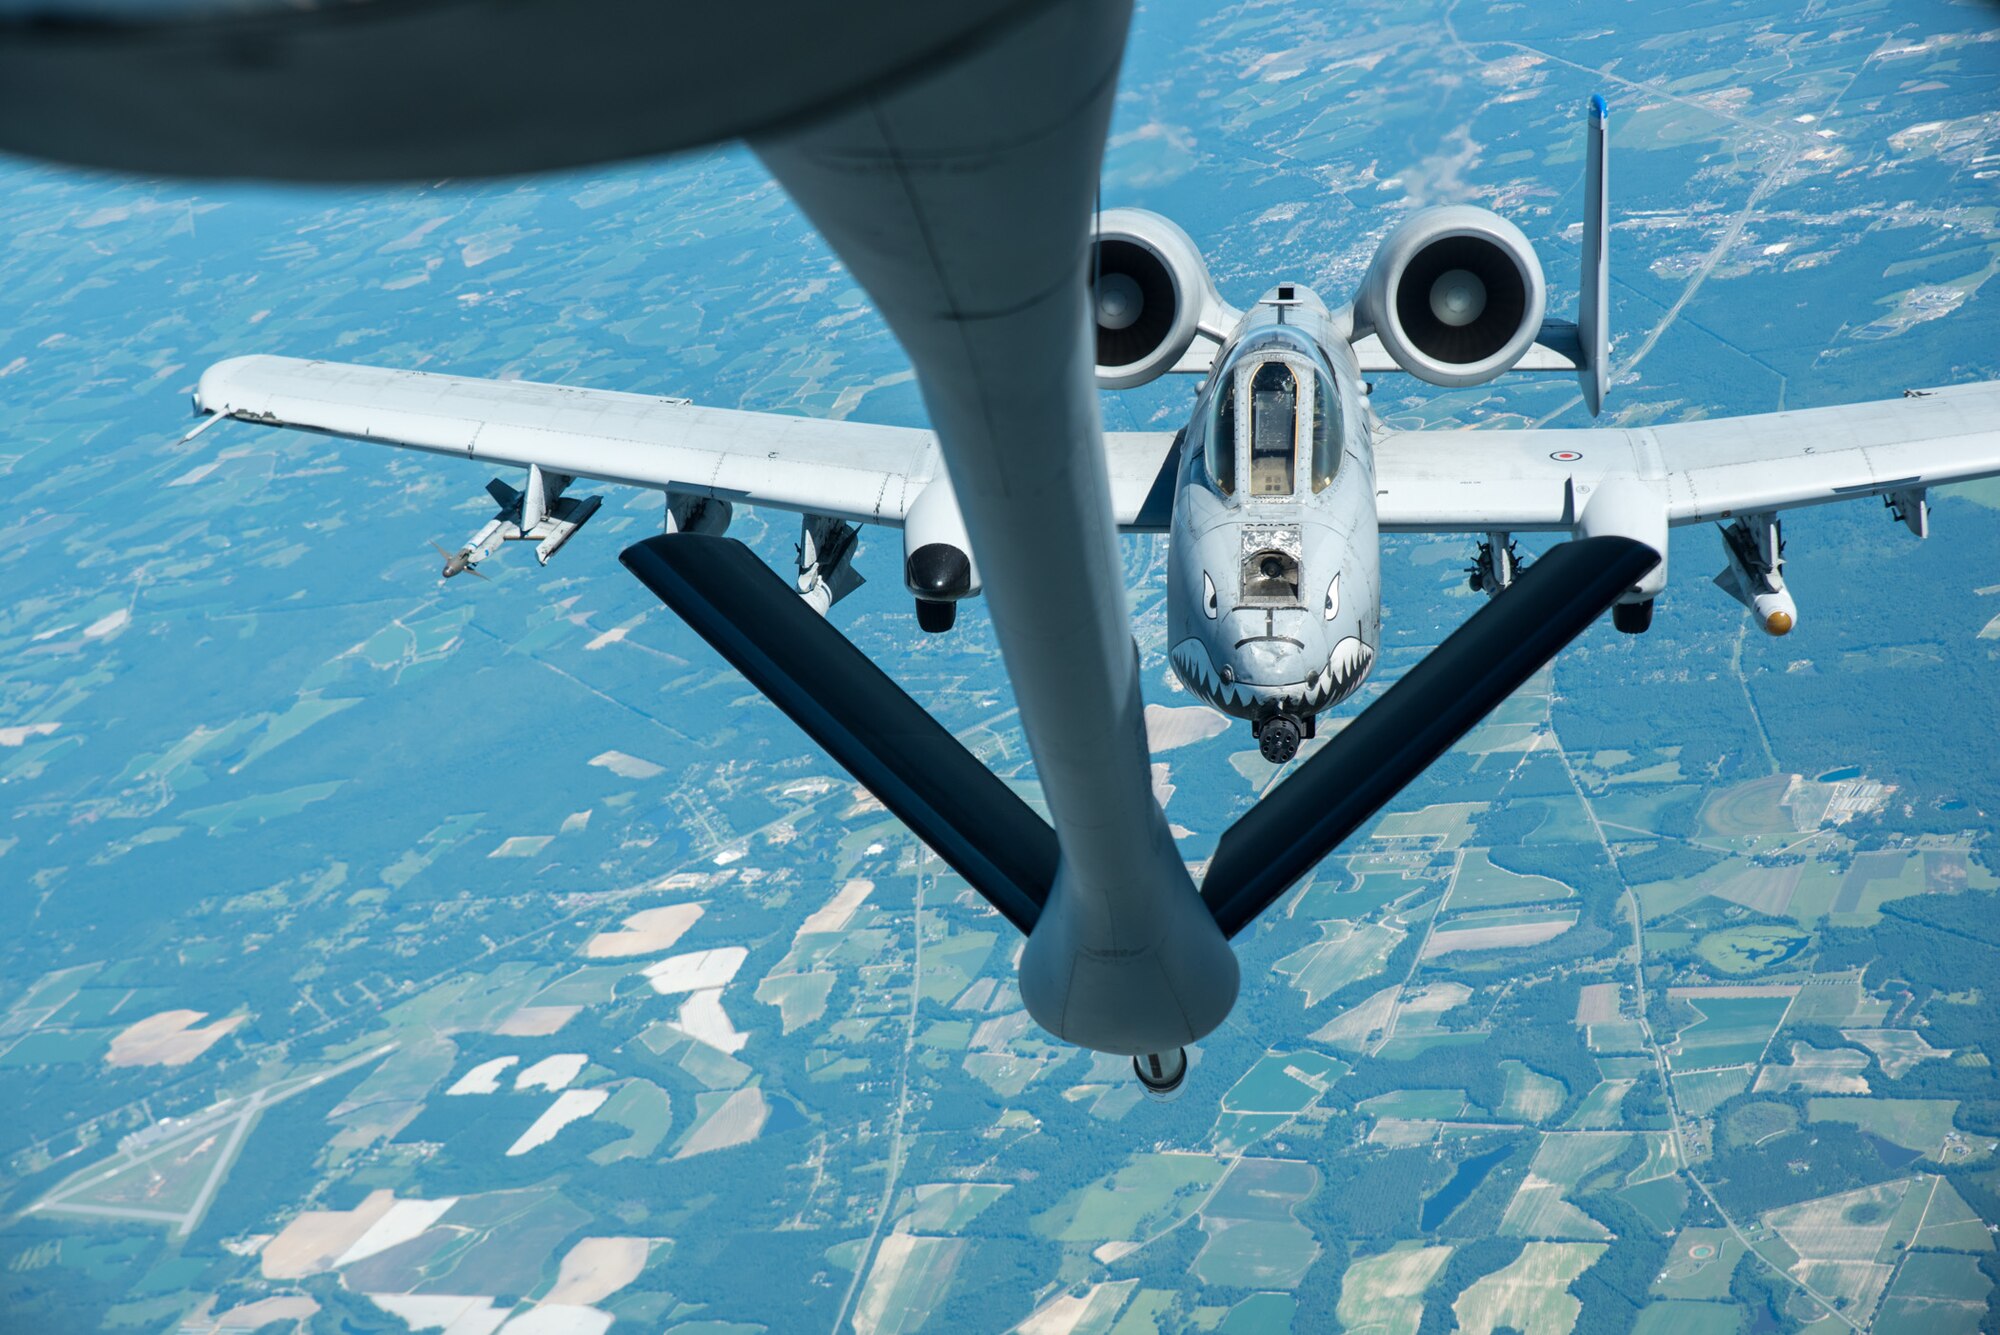 An A-10C from the 476th Fighter Group at Moody AFB, Ga approaches the boom from a KC-135 Stratotanker during refueling operations over Georgia on July 14 2016. (U.S. Air Force photo by Master Sgt. Eric J. Amidon)